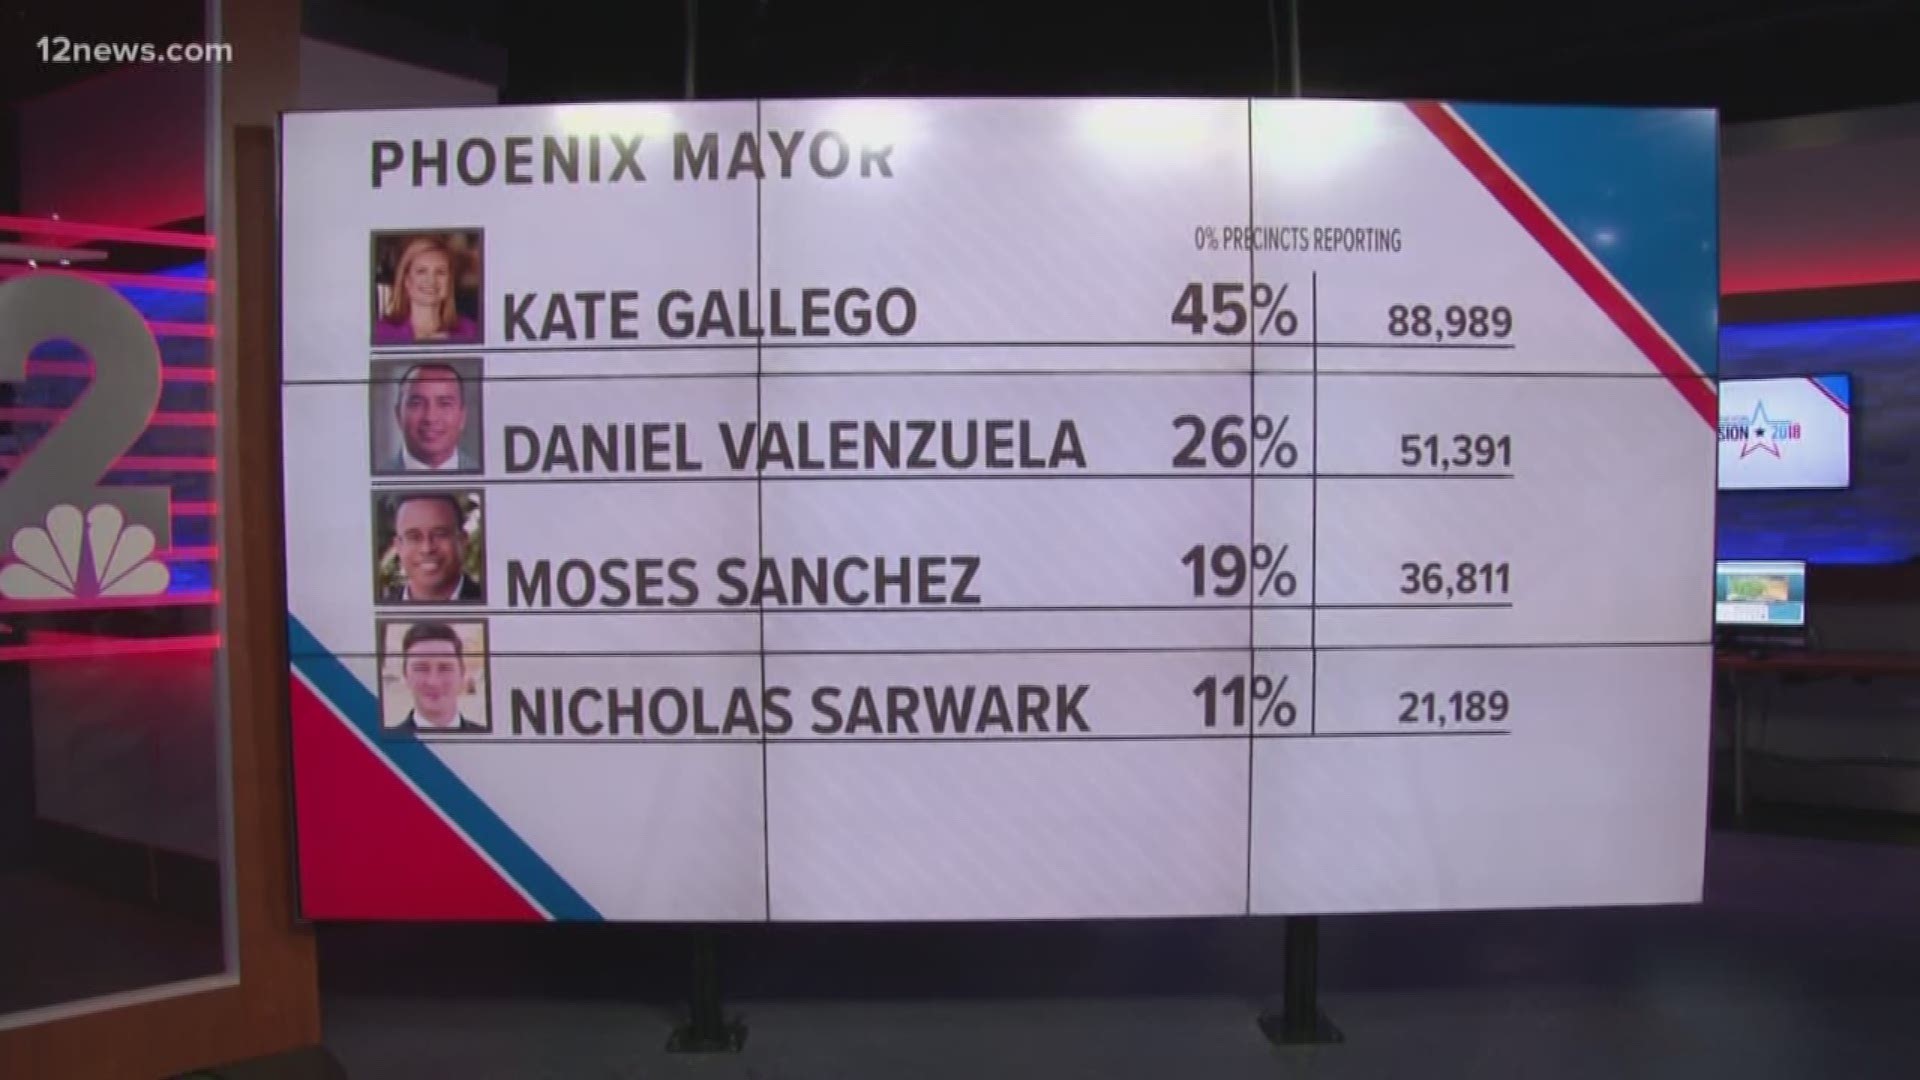 The race for Phoenix mayor moves to a runoff election. Kate Gallego and David Valenzuela will face off in the next election.